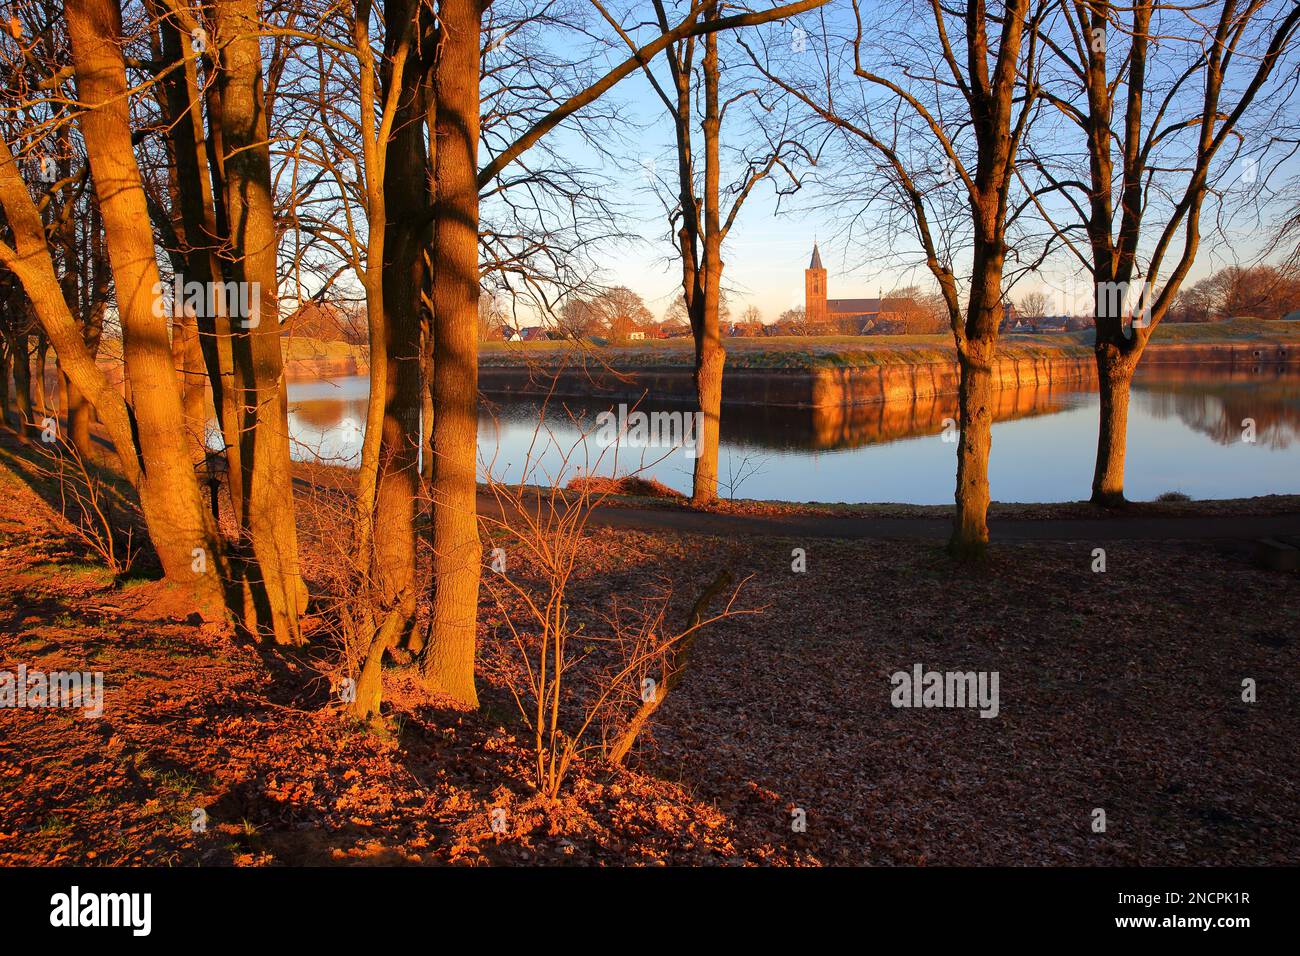 The fortifications and moats of the city of Naarden, Netherlands, with the Grote Kerk church in the background Stock Photo